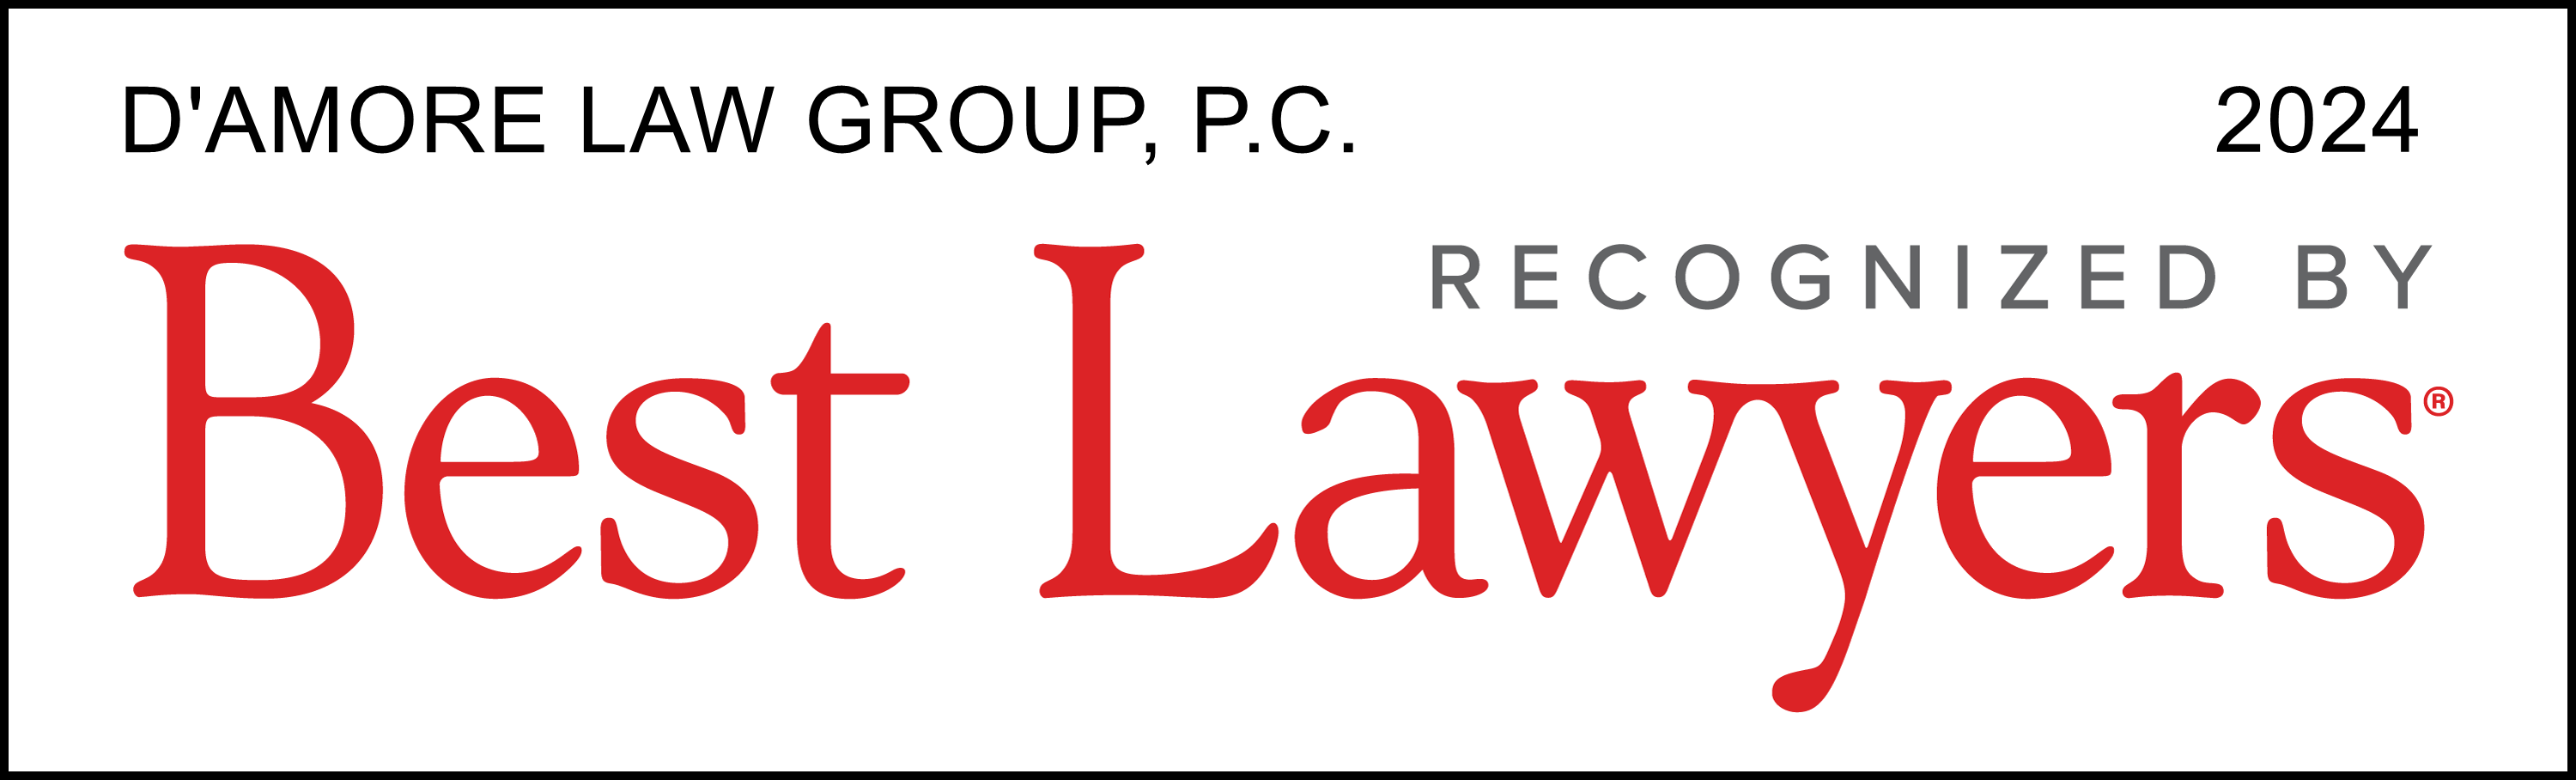 D'Amore Law Group Best Lawyers Badge 2024